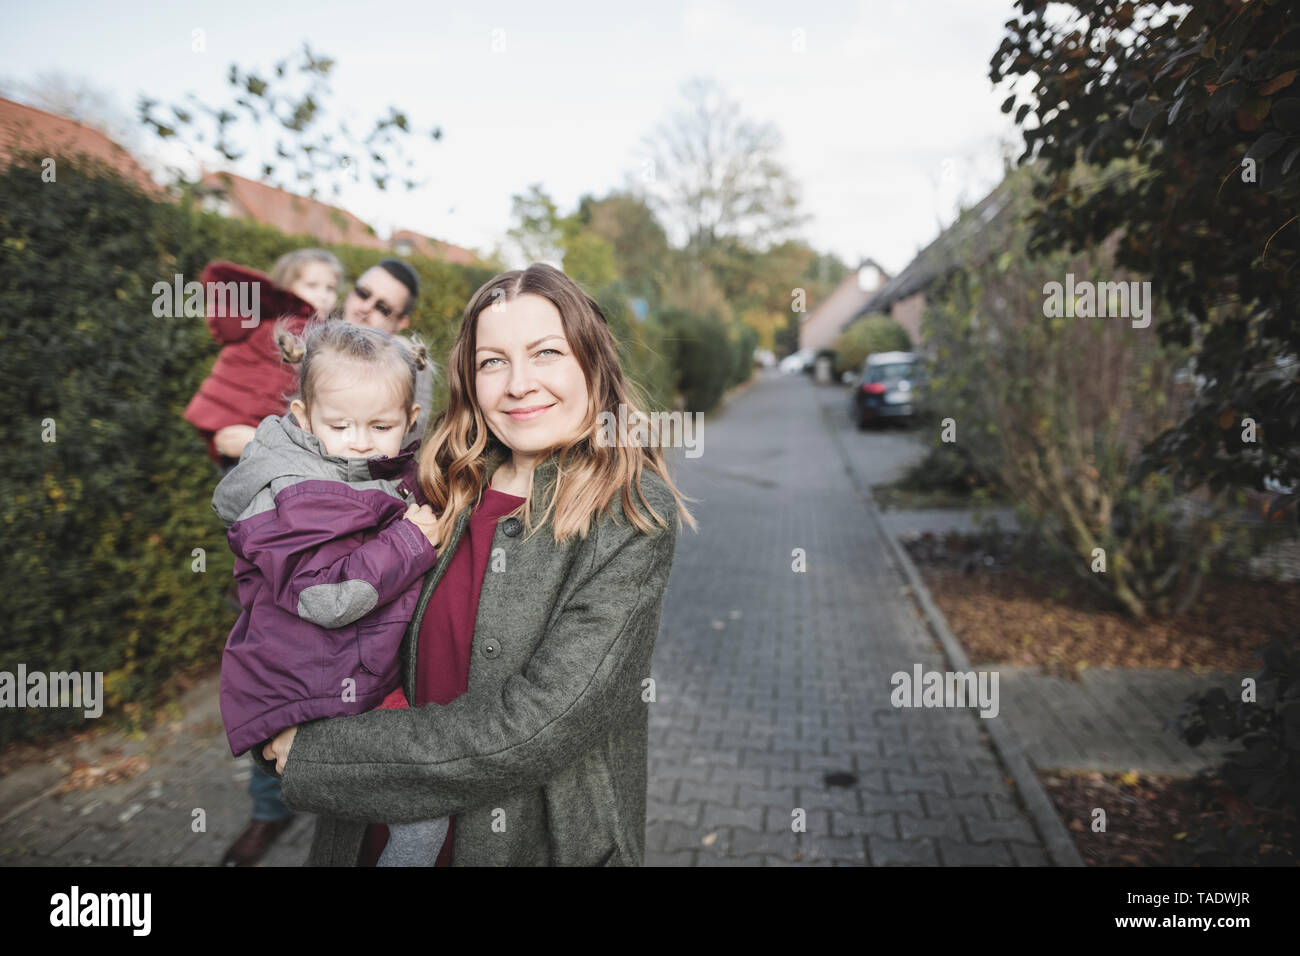 Portrait of family on path in residential area Stock Photo